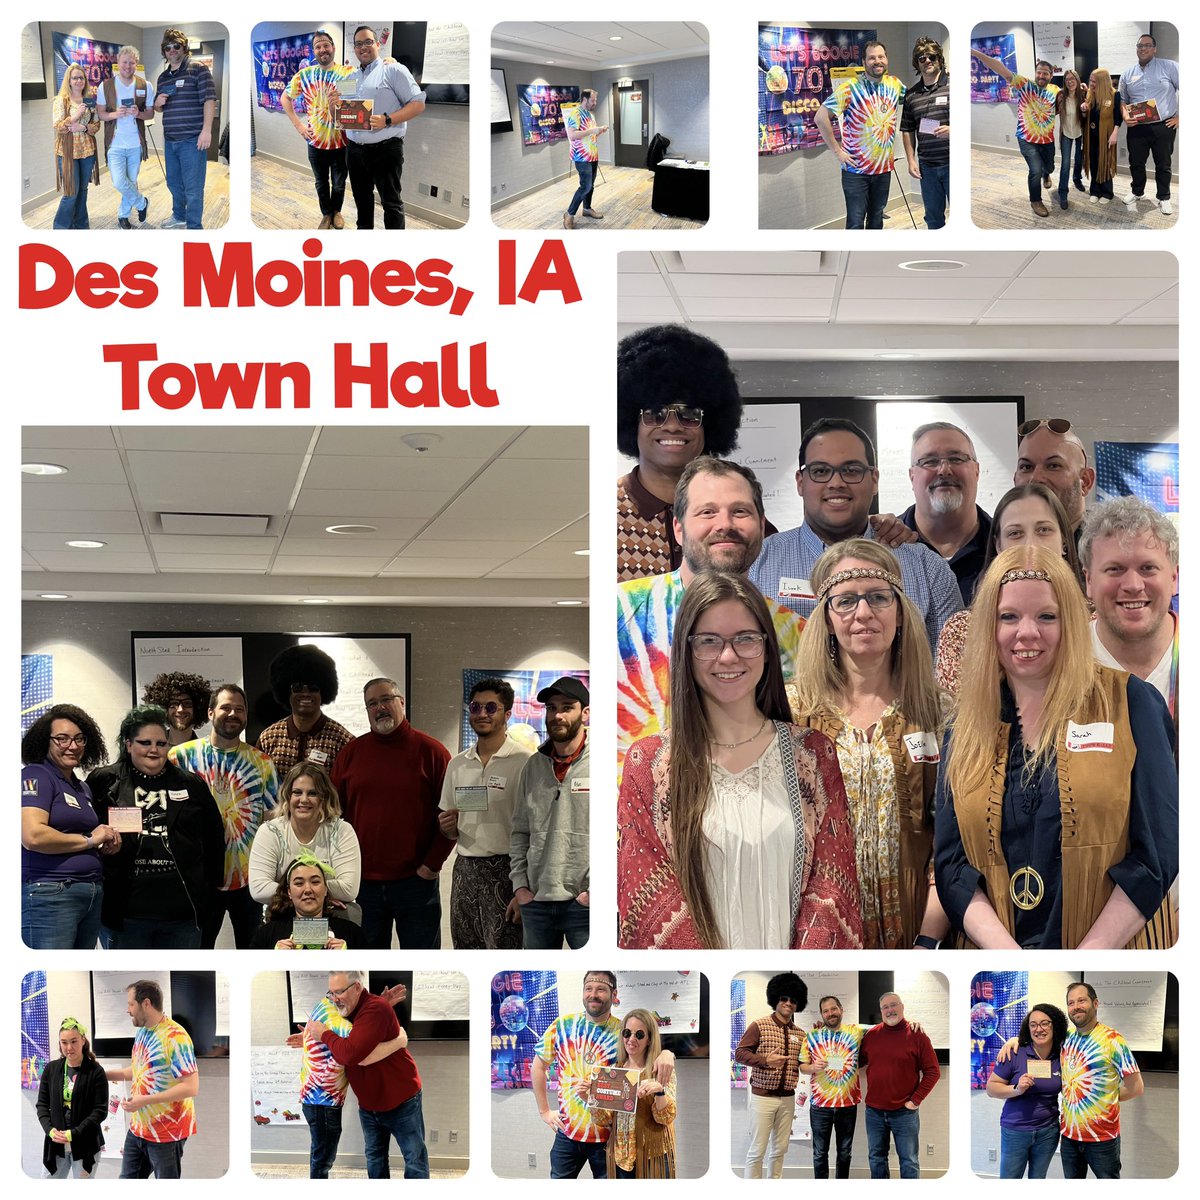 Iowa and South Dakota leaders bringing the funk in Des Moines, IA and peppersenting! Thanks for your engagement over the Town Halls! 🌶️❤️#chilislove #MidwestIsTheBest @dougcomings @train3rgirl @aLee1529 @LynAj4 @john_dinzeo @PaulSchonsSr